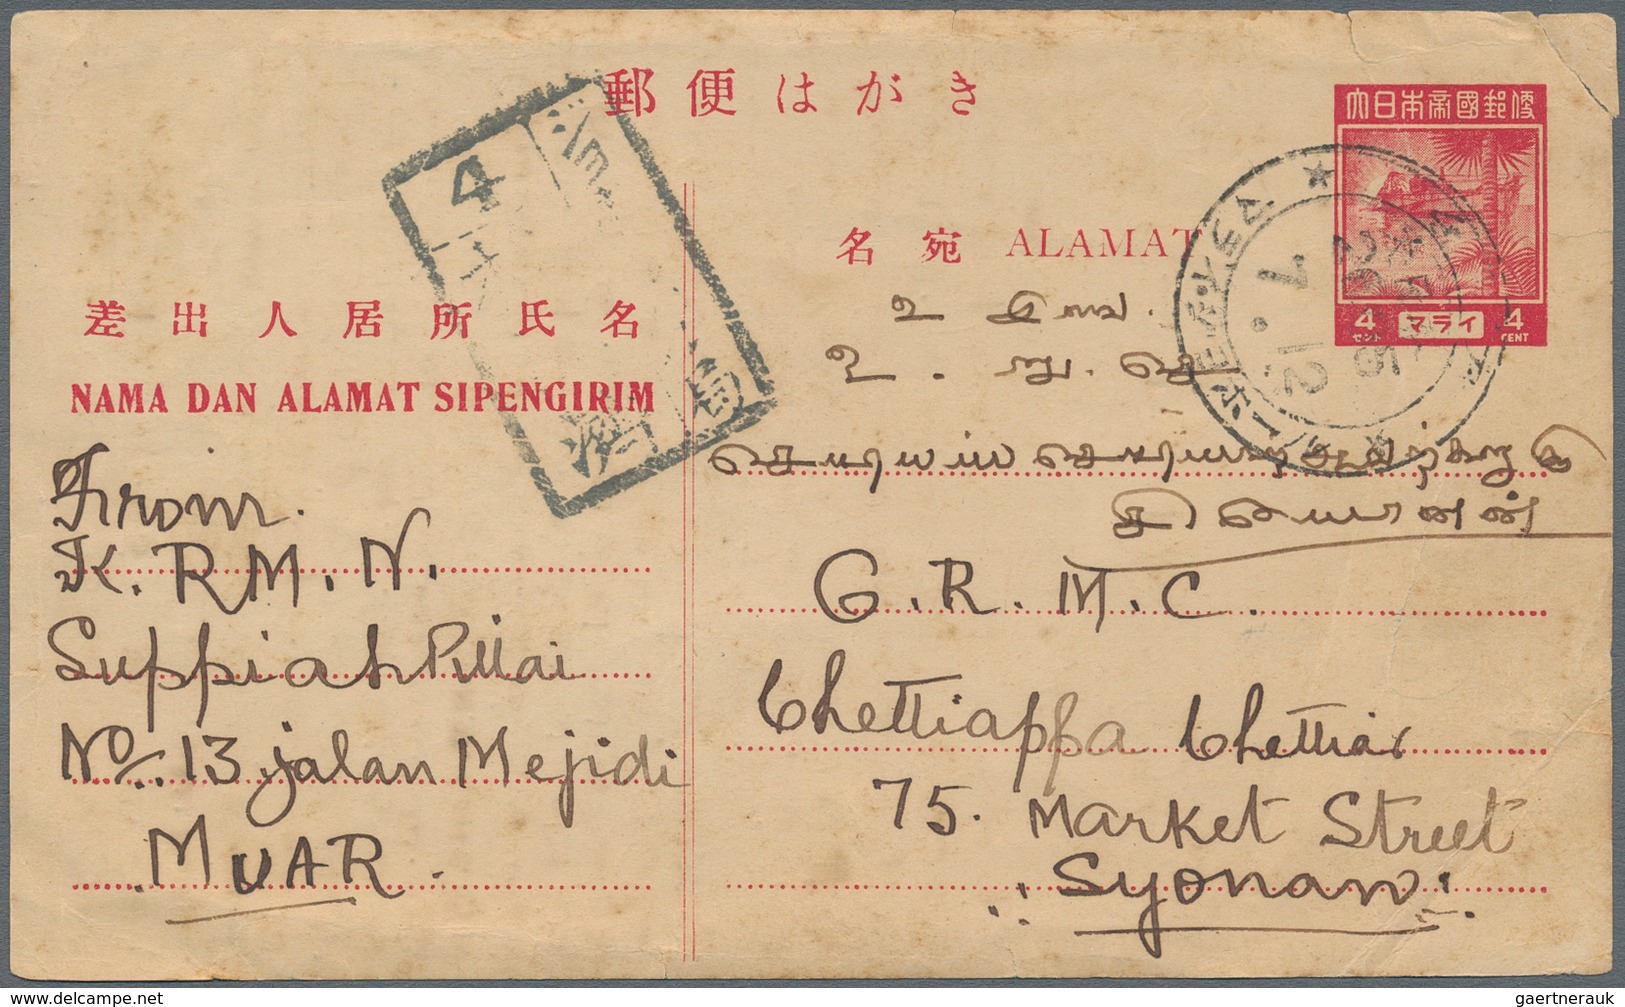 Japanische Besetzung  WK II - Malaya: General issues, 1943, stationery card 4 C. red tin transport (